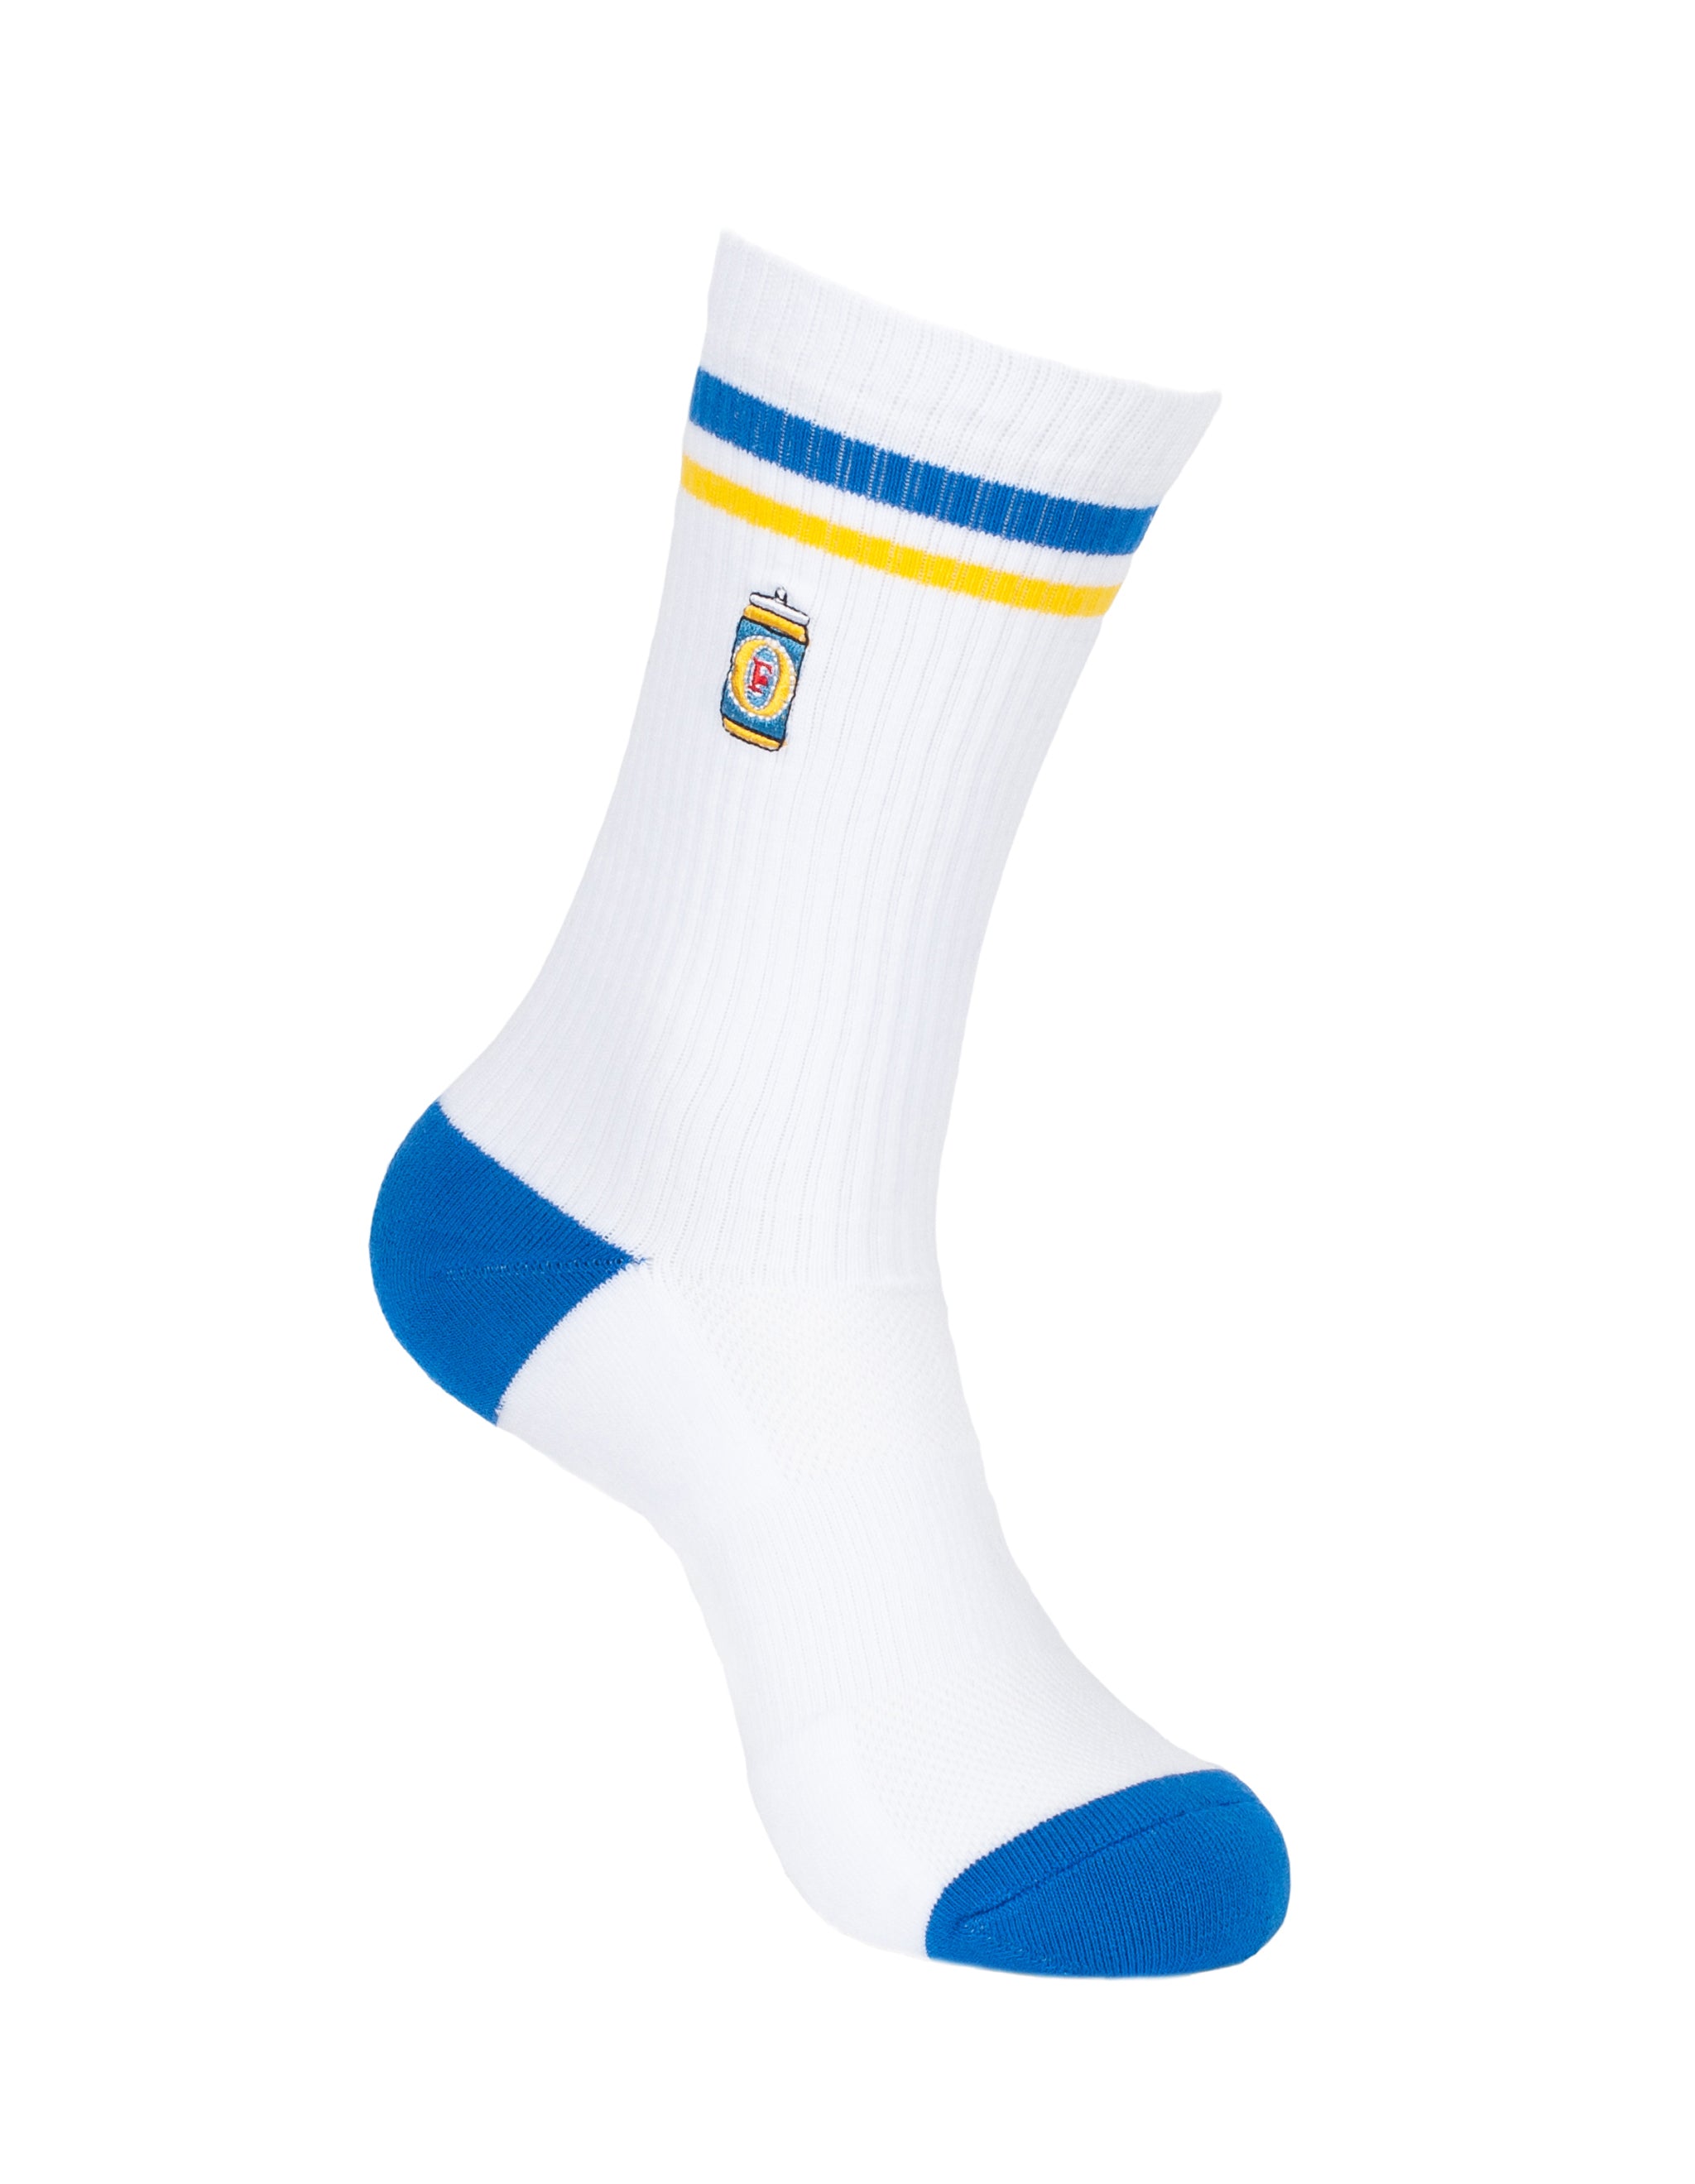 Fosters Icons 2 Pack Socks